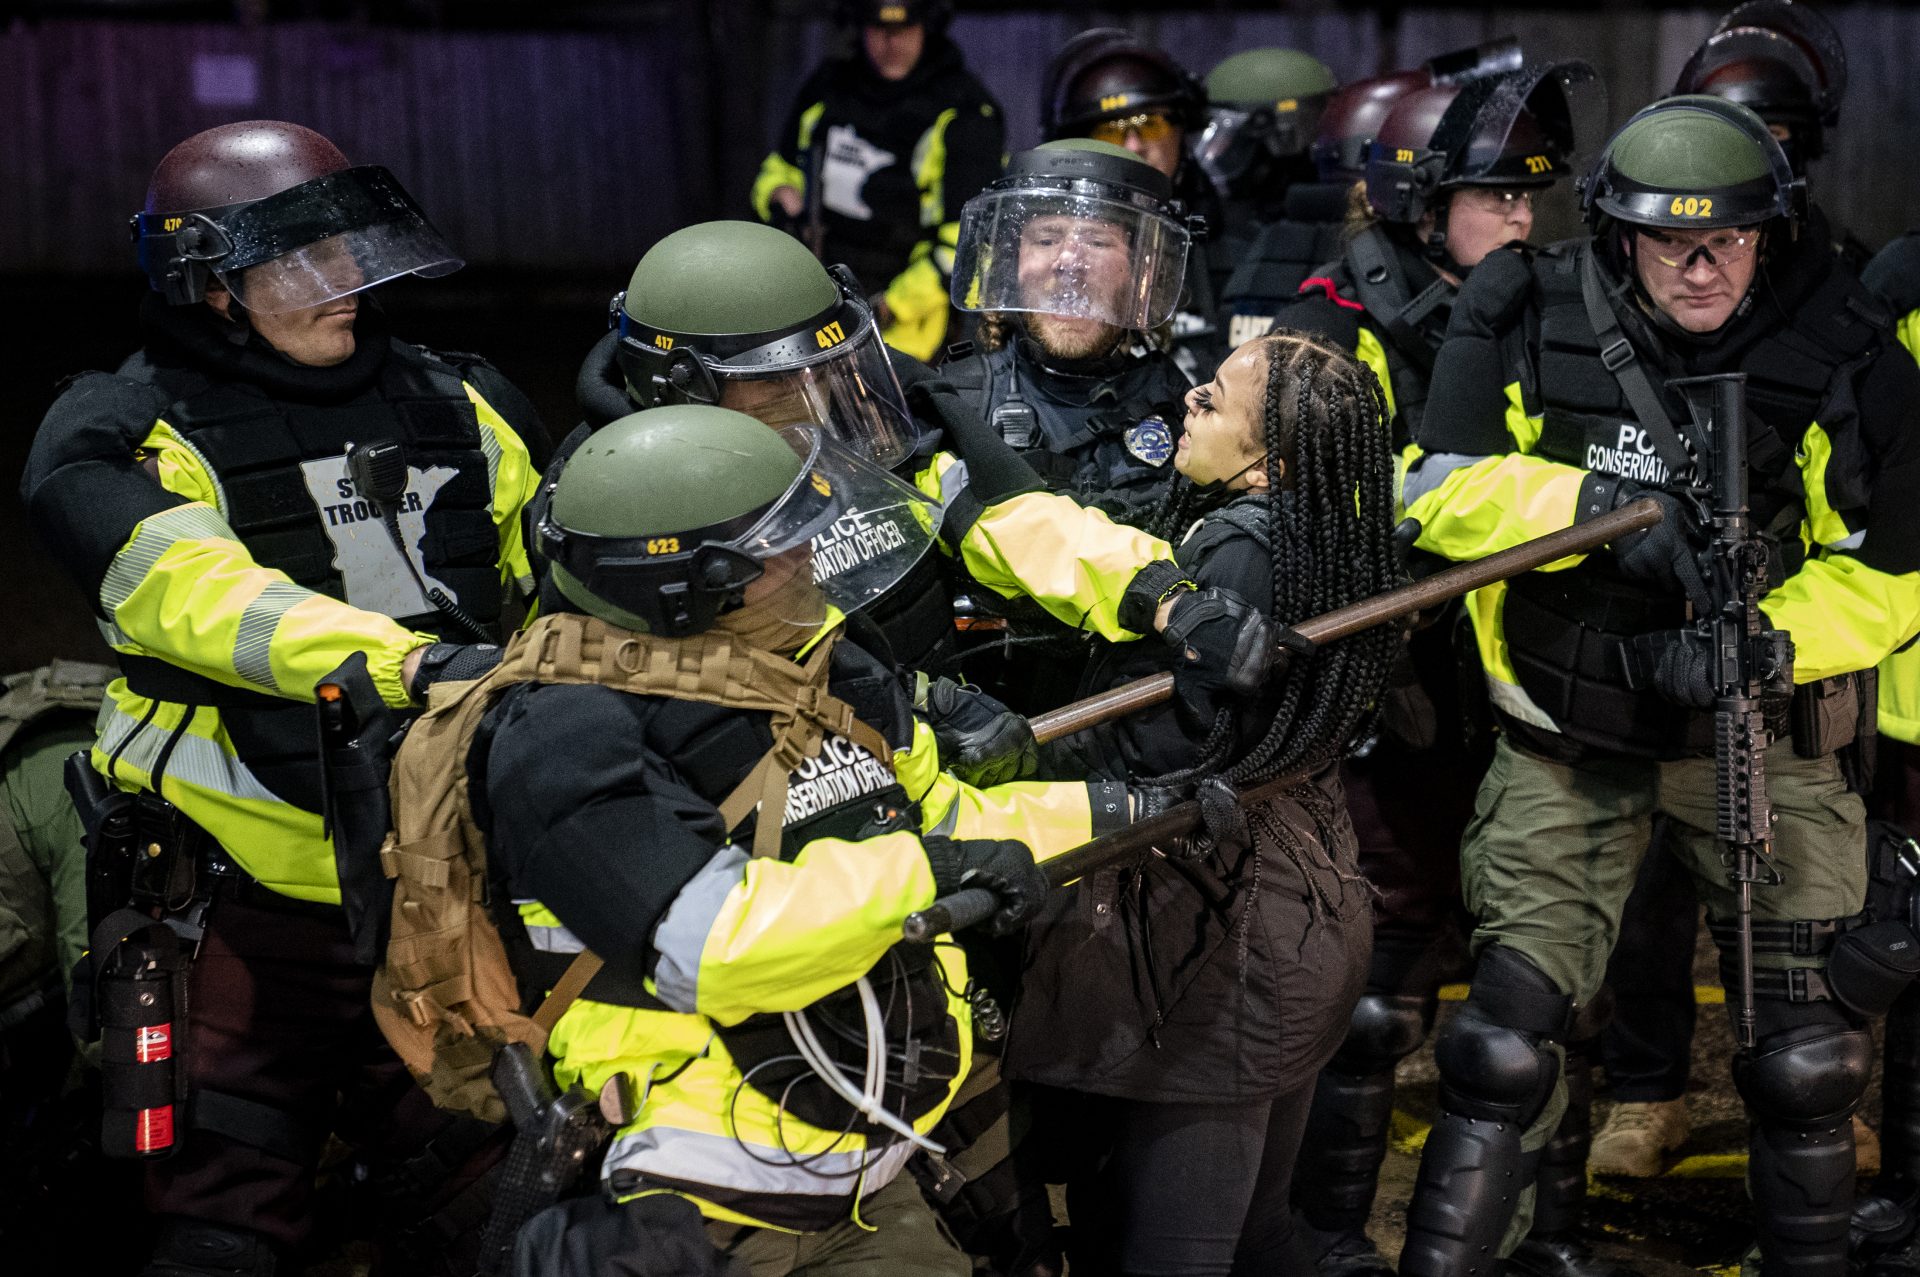 A demonstrator is arrested by police for violating curfew and an order to disperse during a protest against the police shooting of Daunte Wright, Monday, April 12, 2021, in Brooklyn Center, Minn.